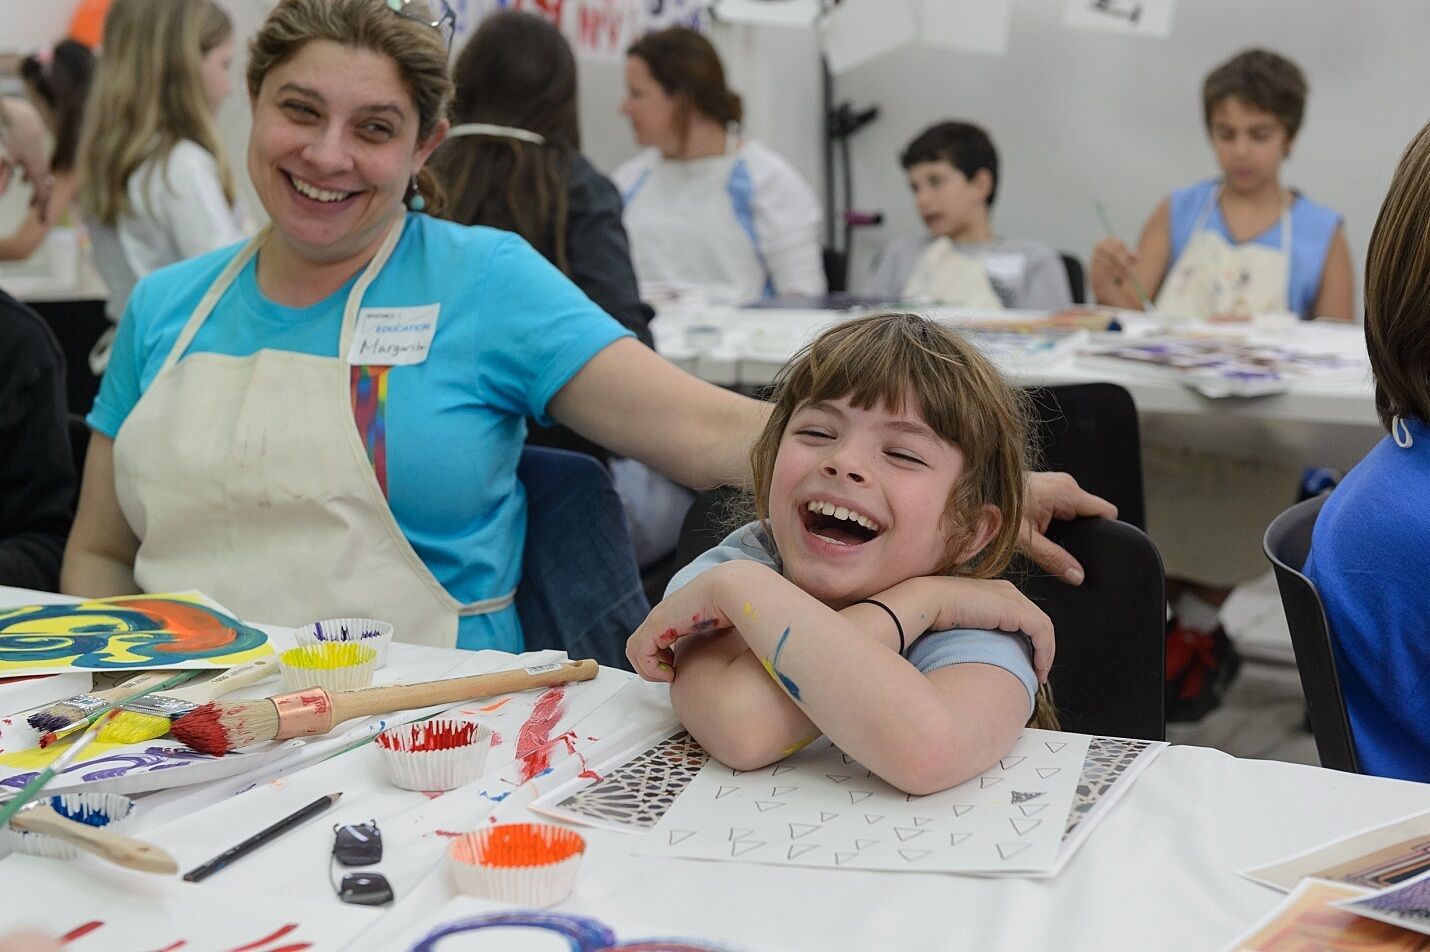 A mother and child laugh during an art class.